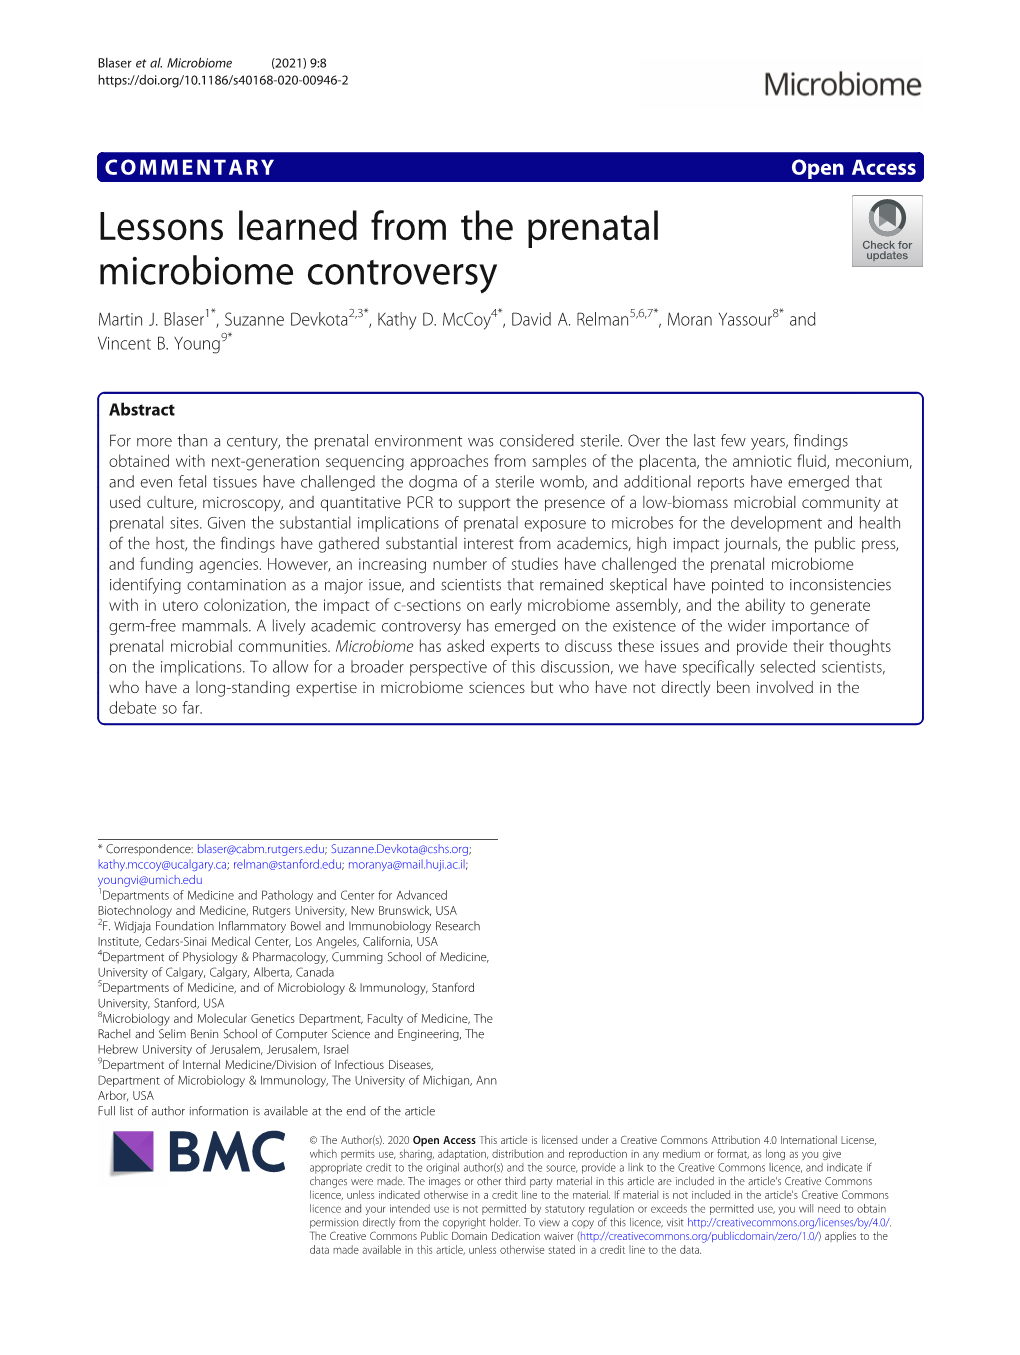 Lessons Learned from the Prenatal Microbiome Controversy Martin J